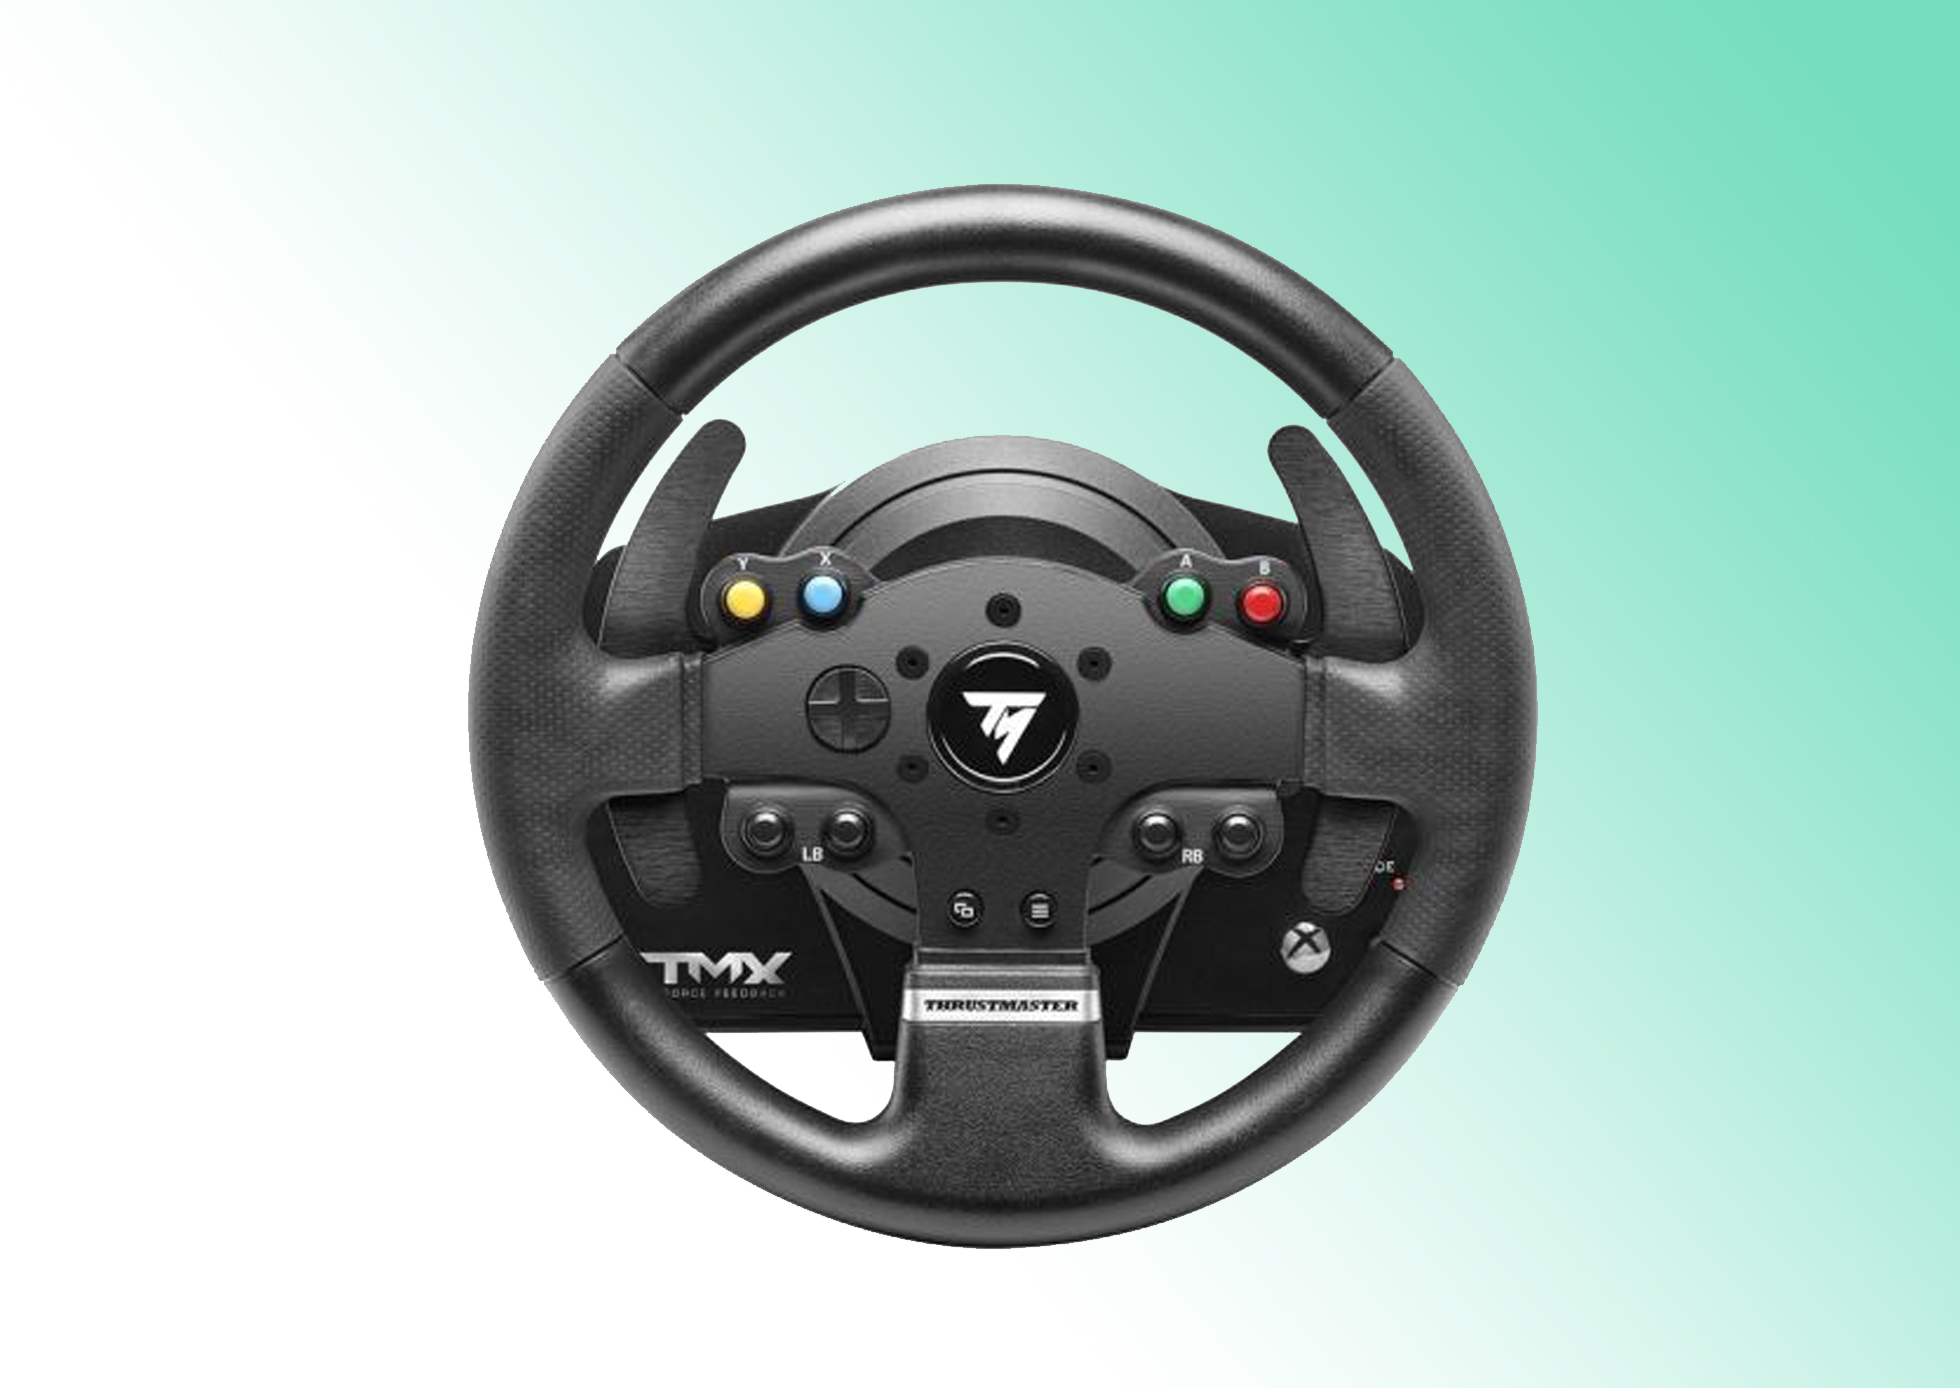 Test and Reviews of the Thrustmaster TMX Force Feedback steering wheel